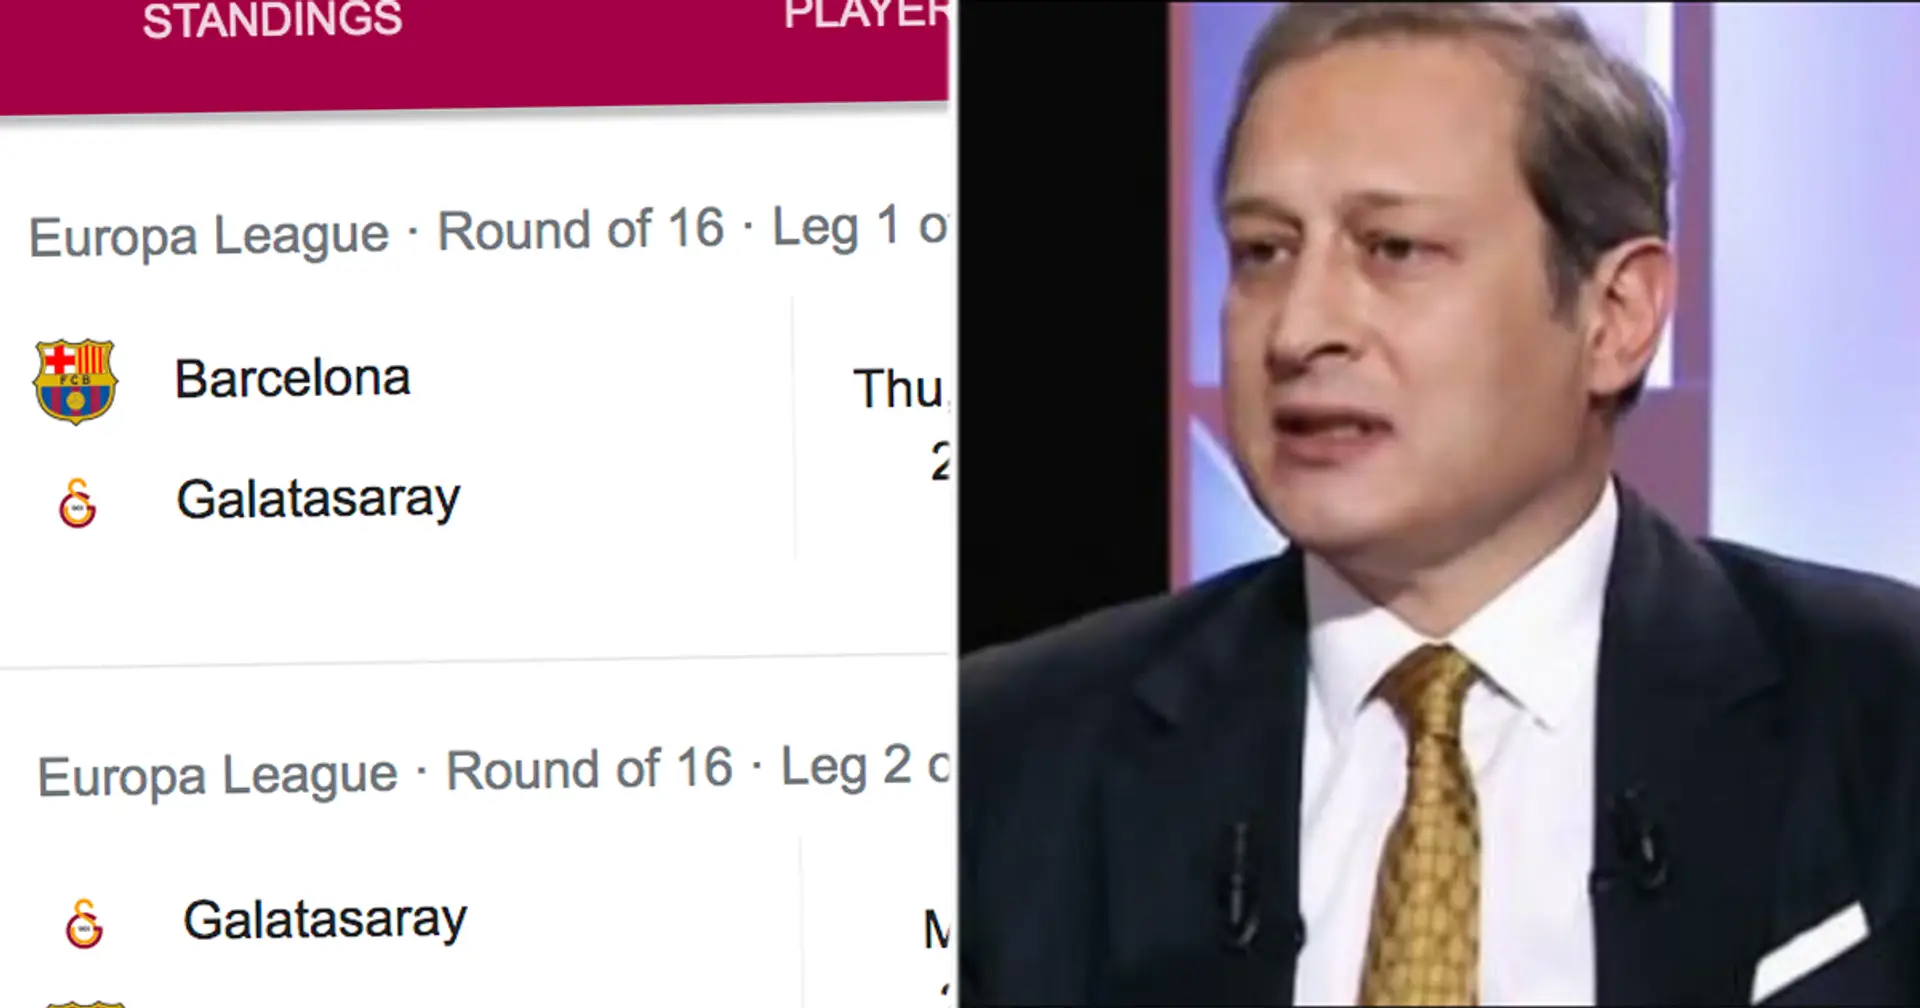 Galatasaray president claims they have '51 per cent chance' to beat Barca, explains why